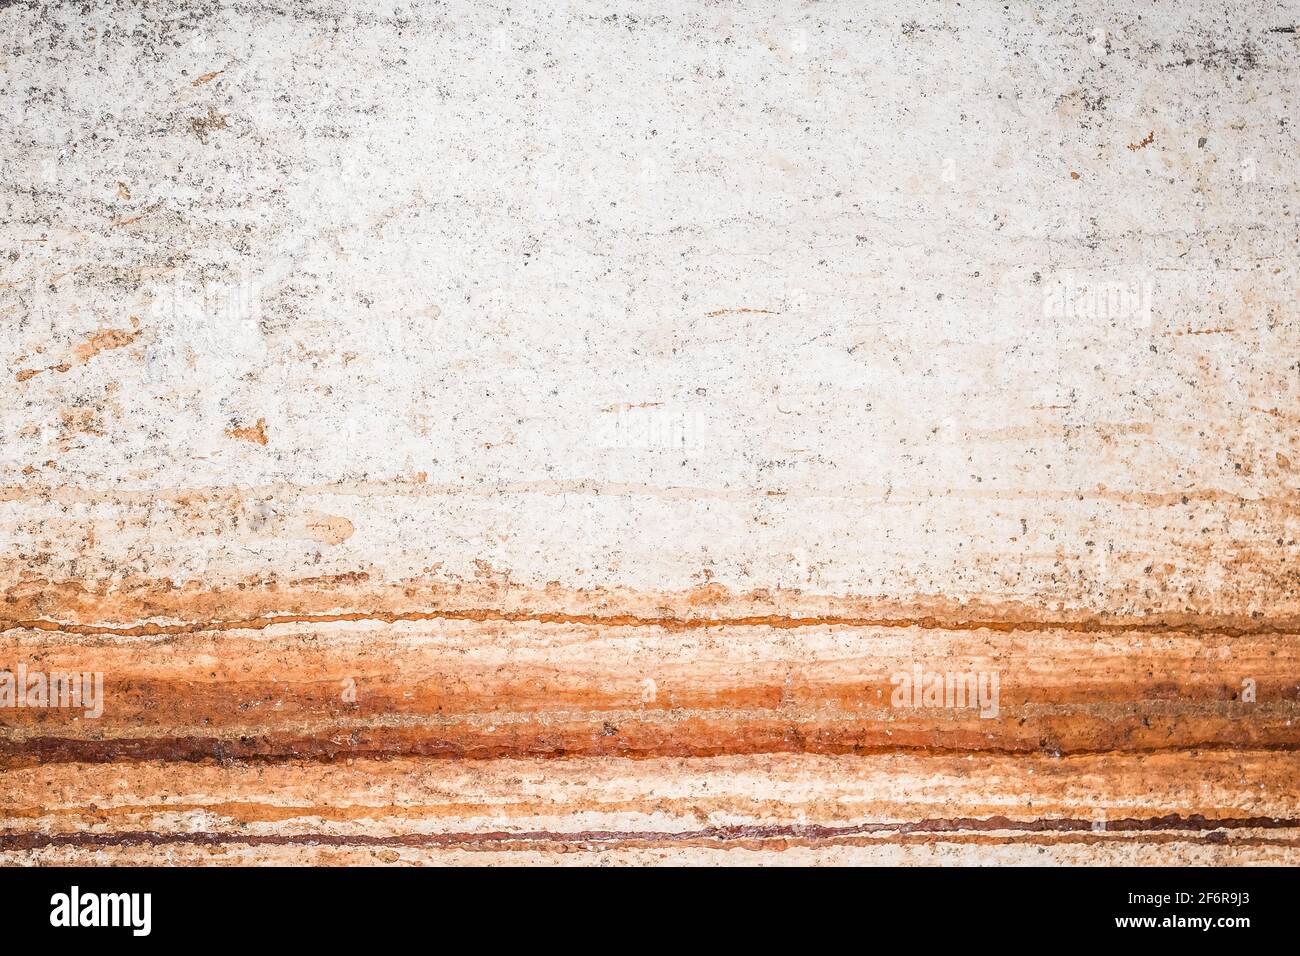 Old white dirty concrete wall texture with abstract rusty pattern background. Stock Photo